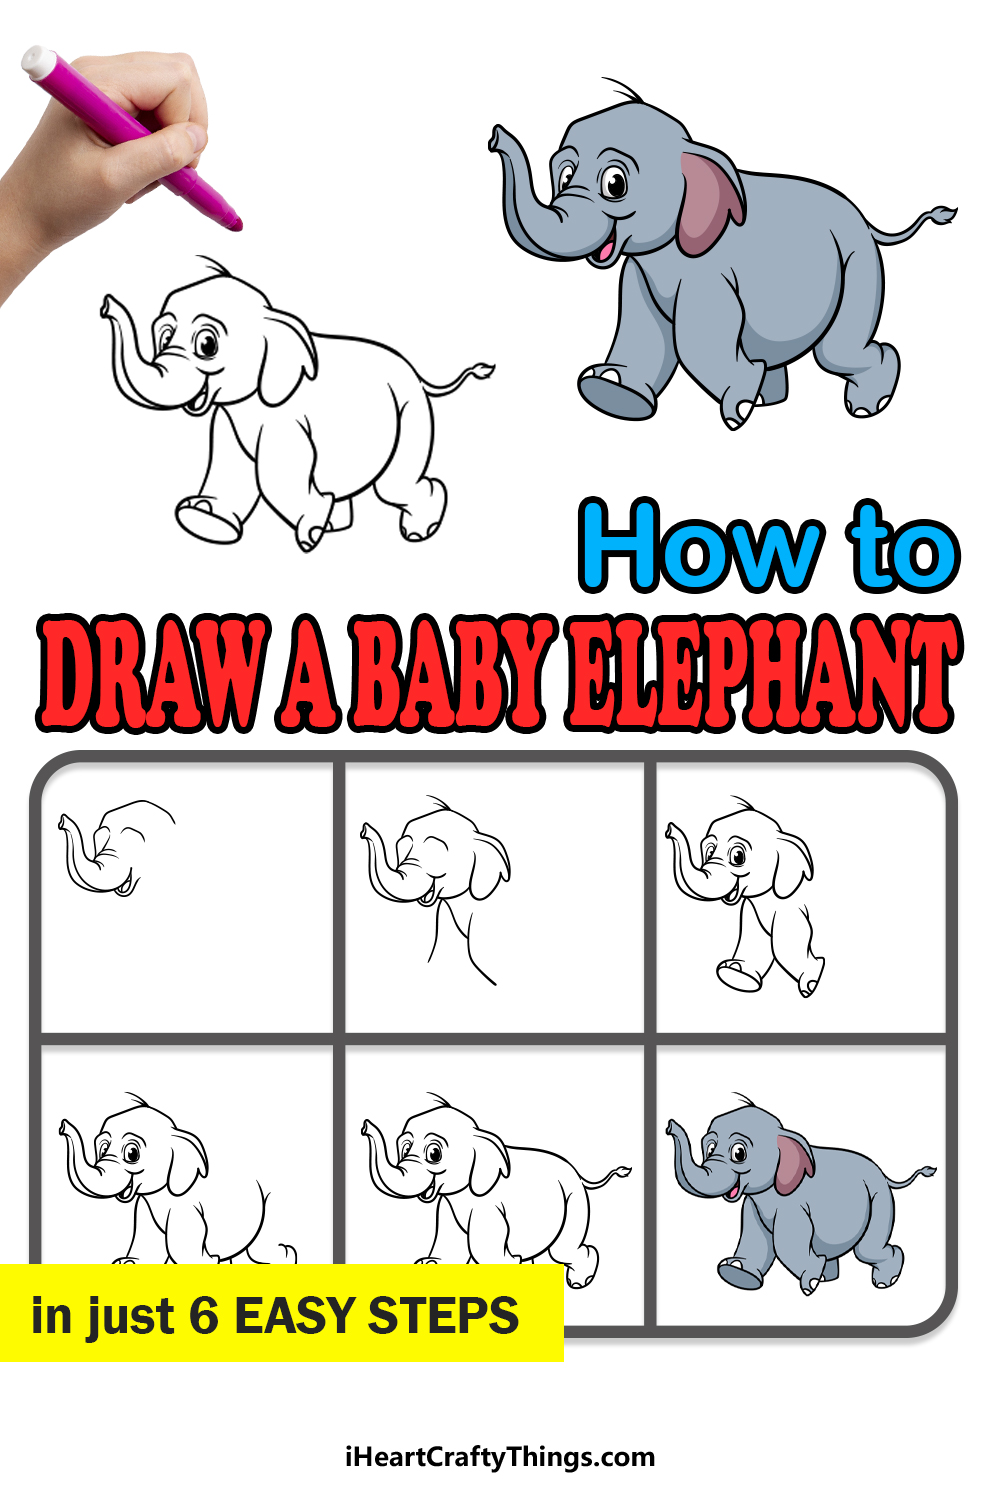 how to draw a baby elephant in 6 easy steps